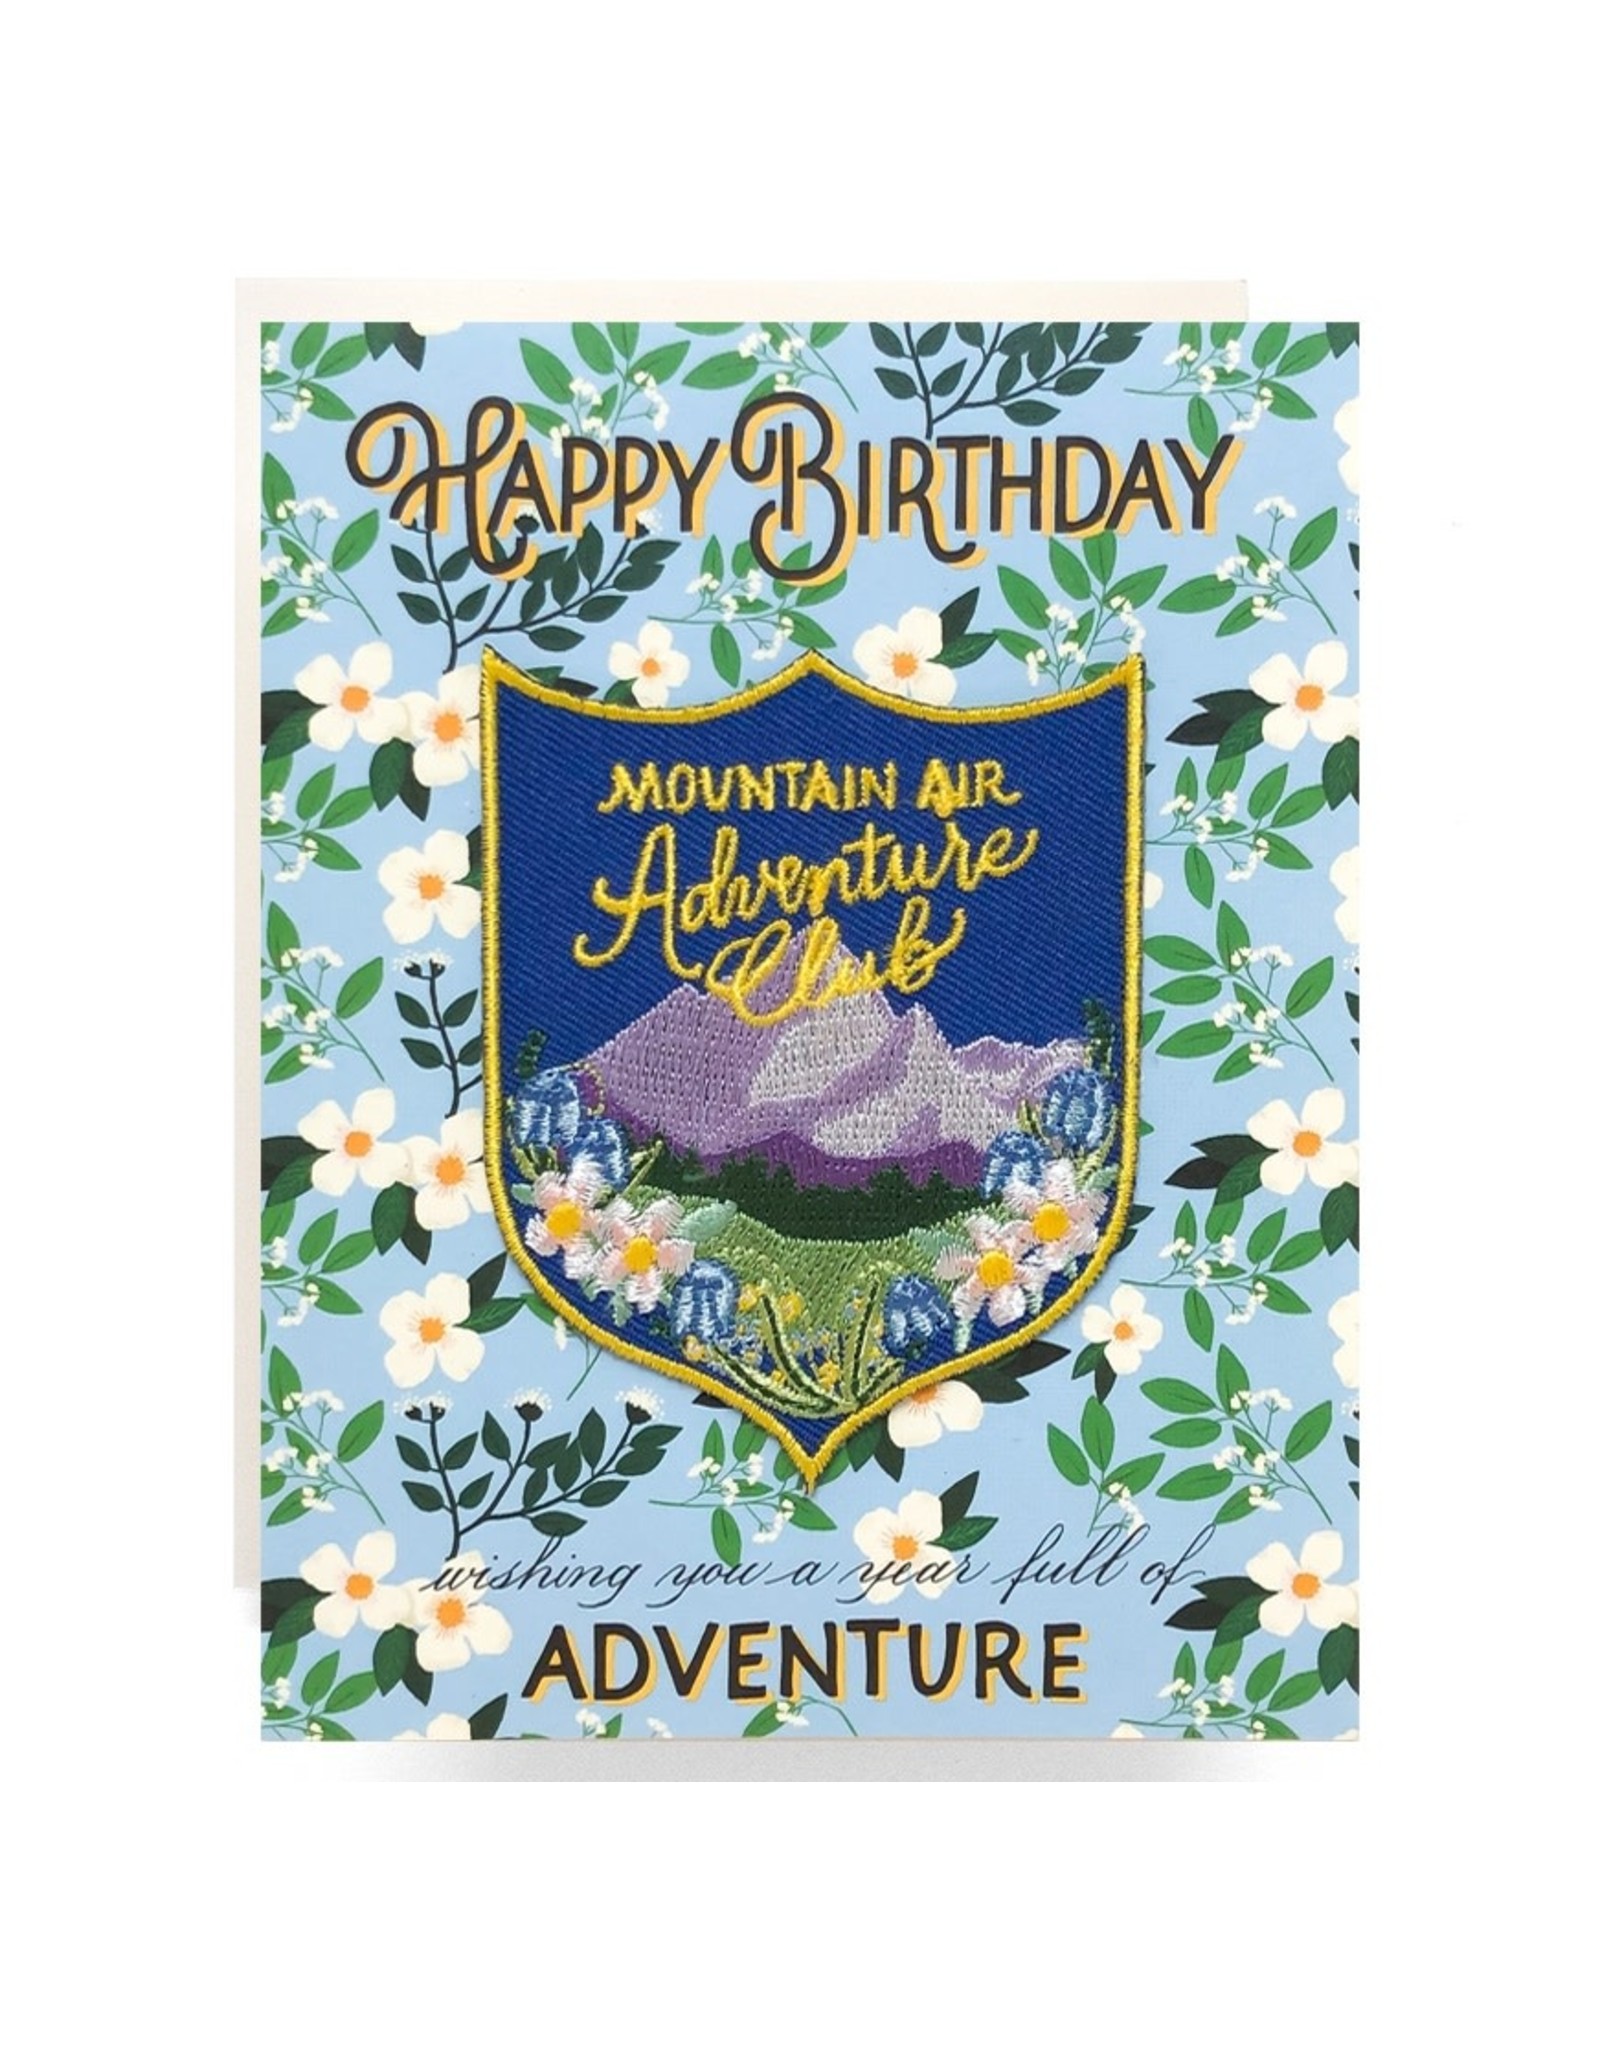 Antiquaria Patch Card: Mountain Adventure Birthday A2 Greeting Card